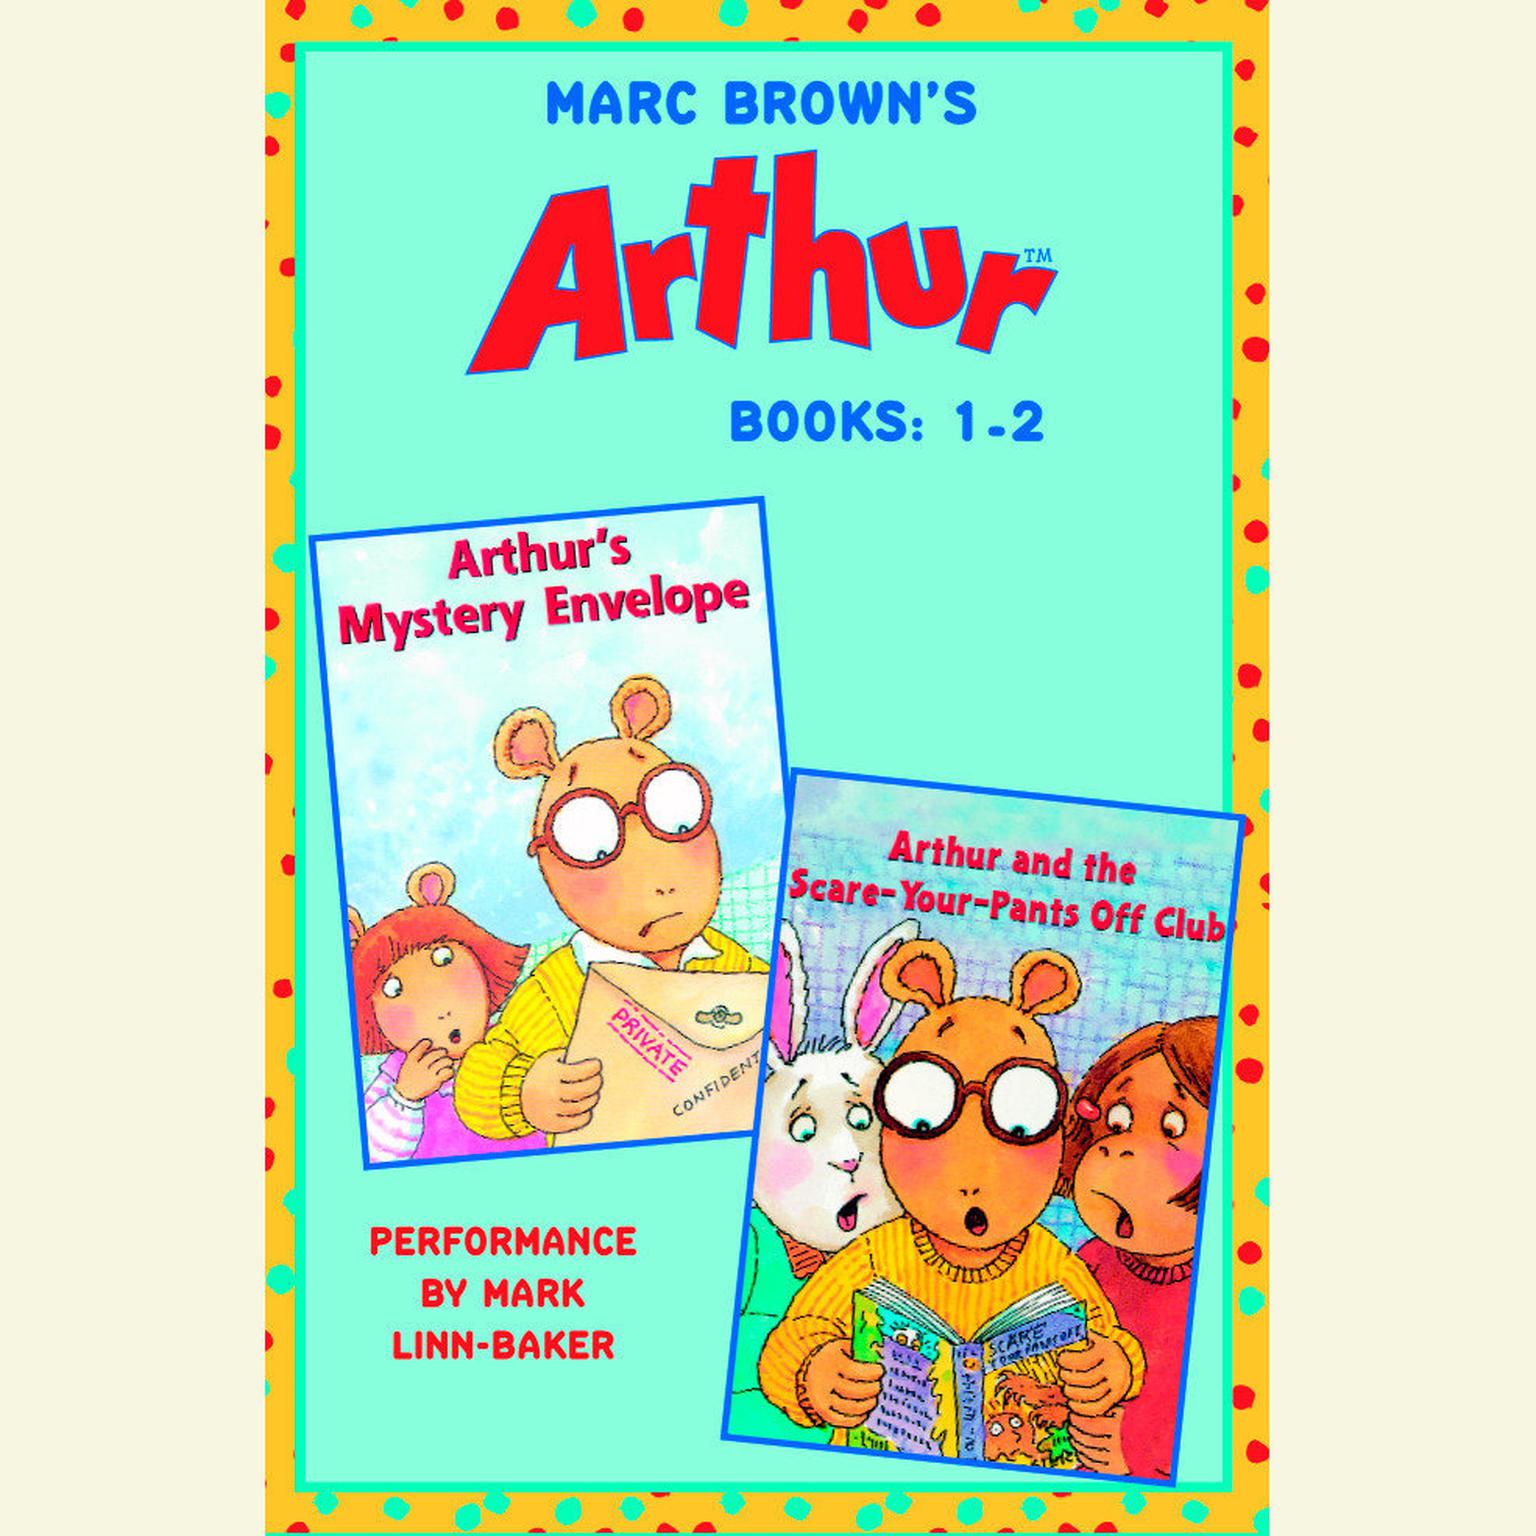 Marc Browns Arthur: Books 1 and 2: Arthurs Mystery Envelope; Arthur and the Scare-Your-Pants-Off Club Audiobook, by Marc Brown